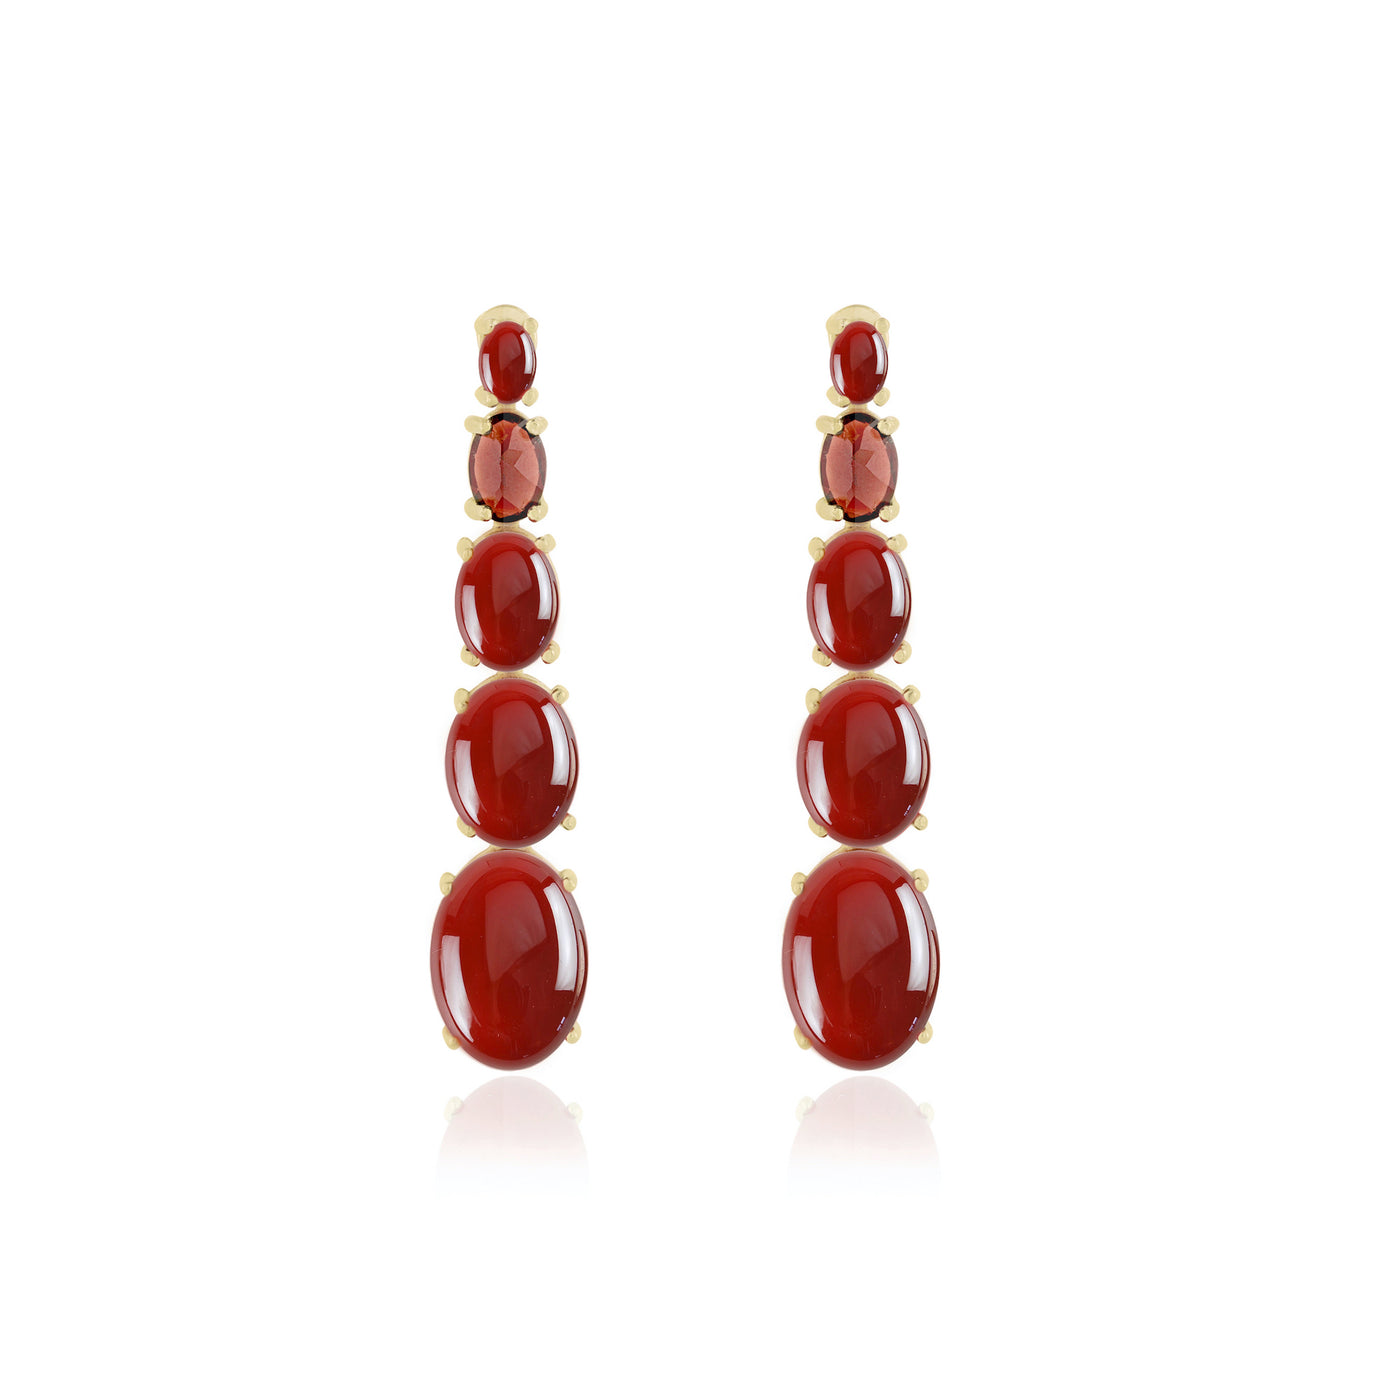 fine jewelry earrings in gold with agate carnelian and ruby gemstones from Atelier ORMAN